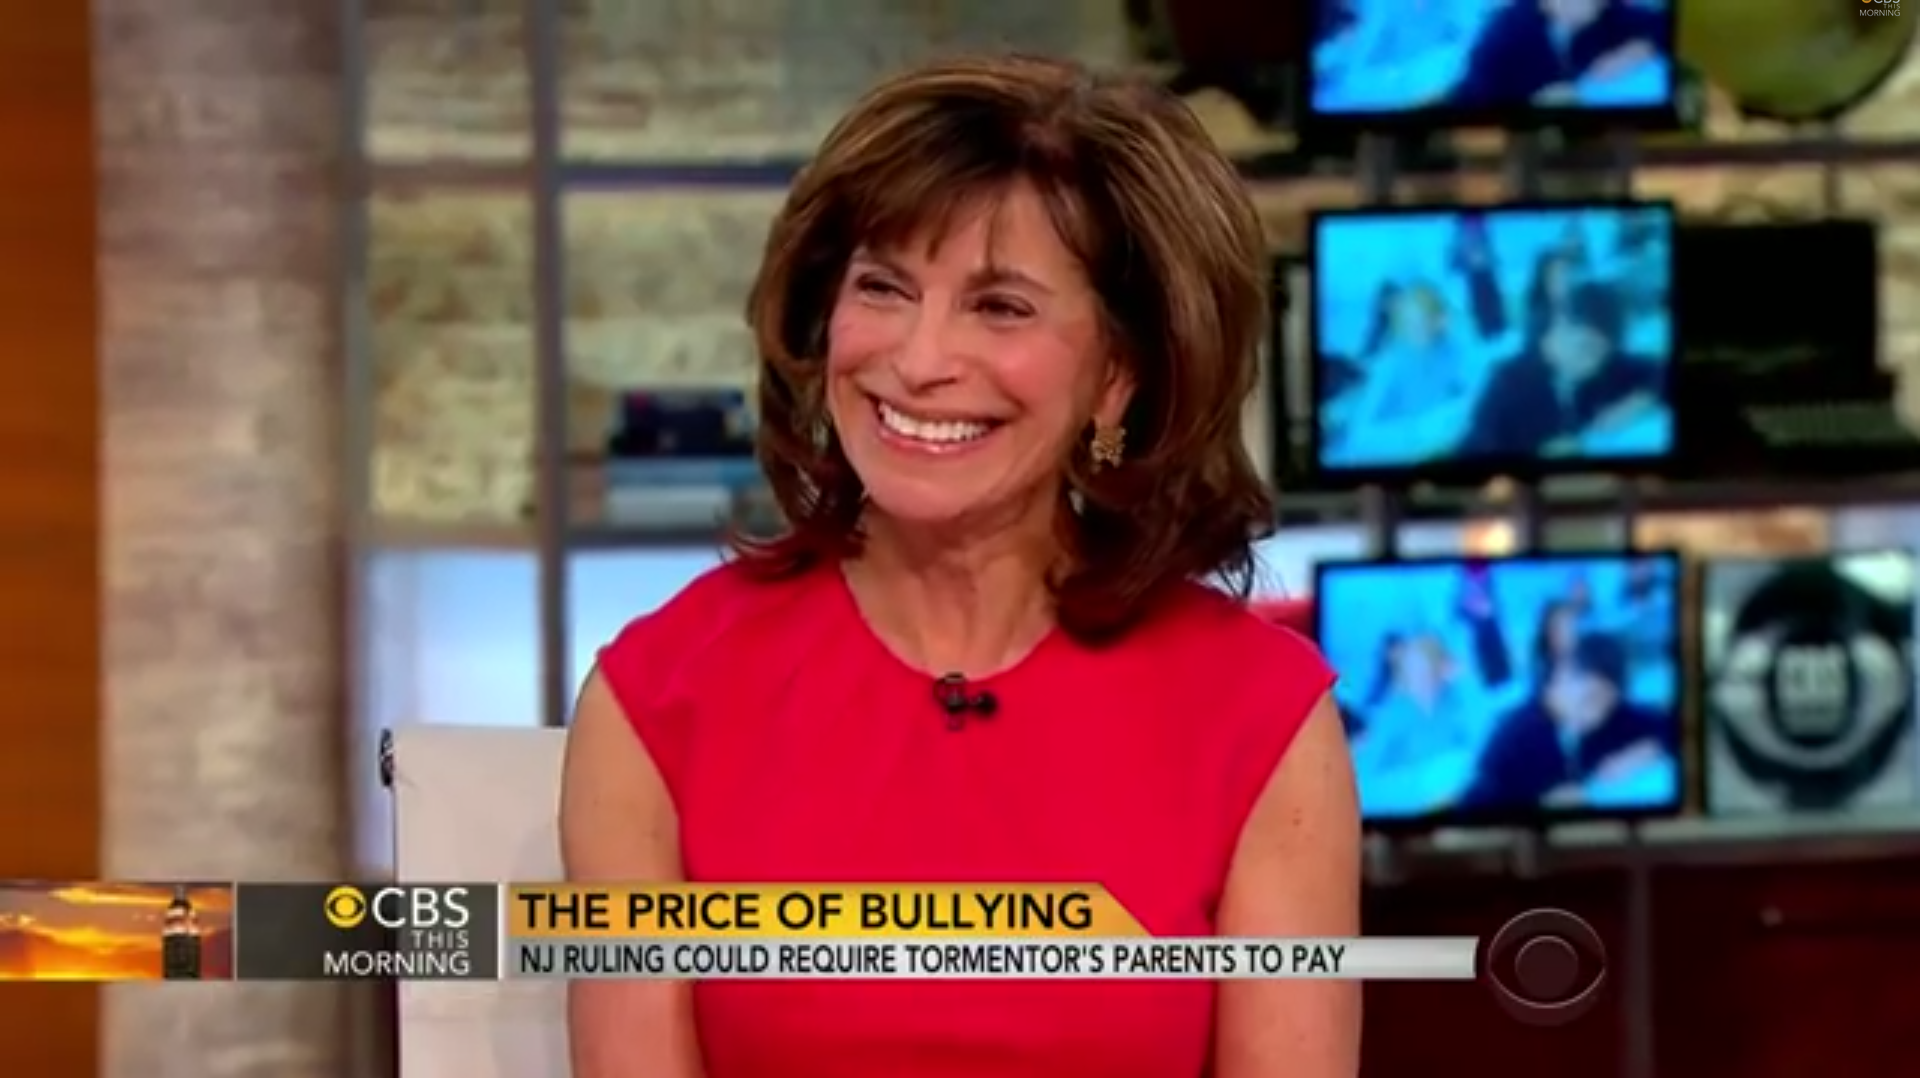 Rikki on: “N.J. ruling requiring bully’s parents to pay”